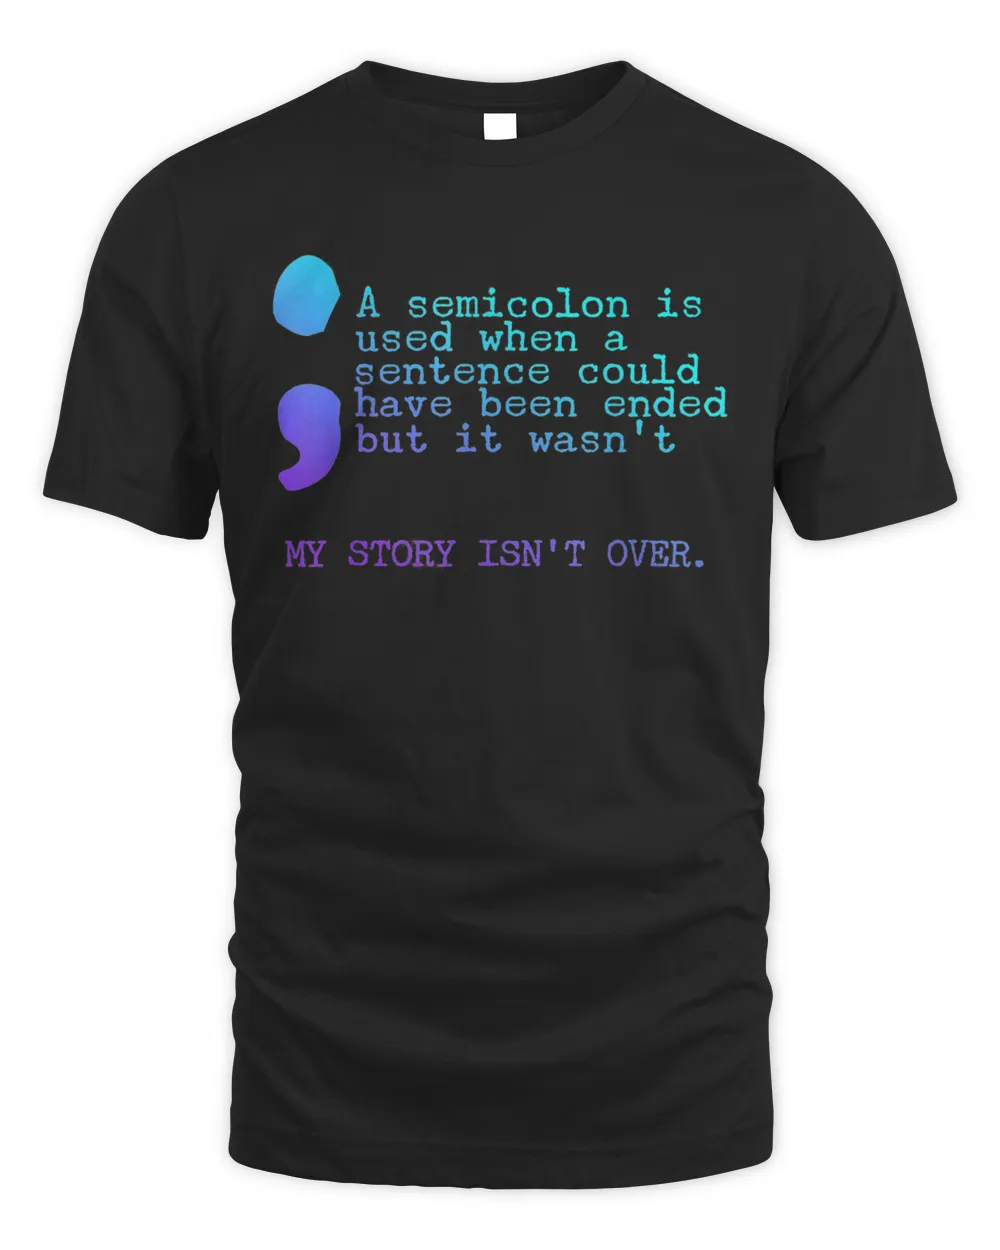 A Semicolon Is Used When A Sentence Could Have Been Ended But It Wasn't Shirt